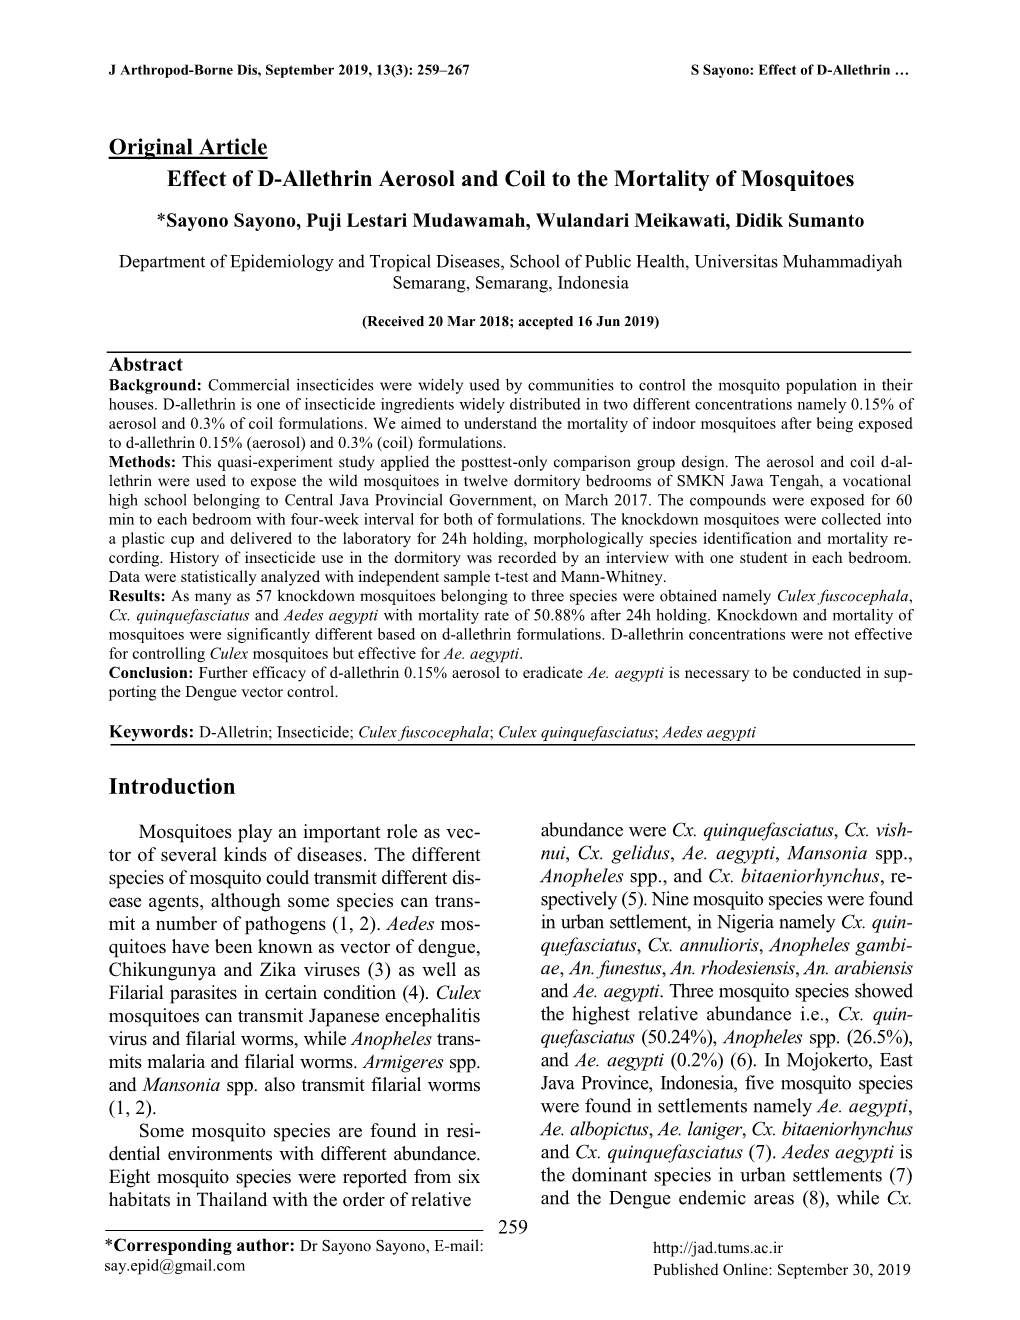 Original Article Effect of D-Allethrin Aerosol and Coil to the Mortality of Mosquitoes